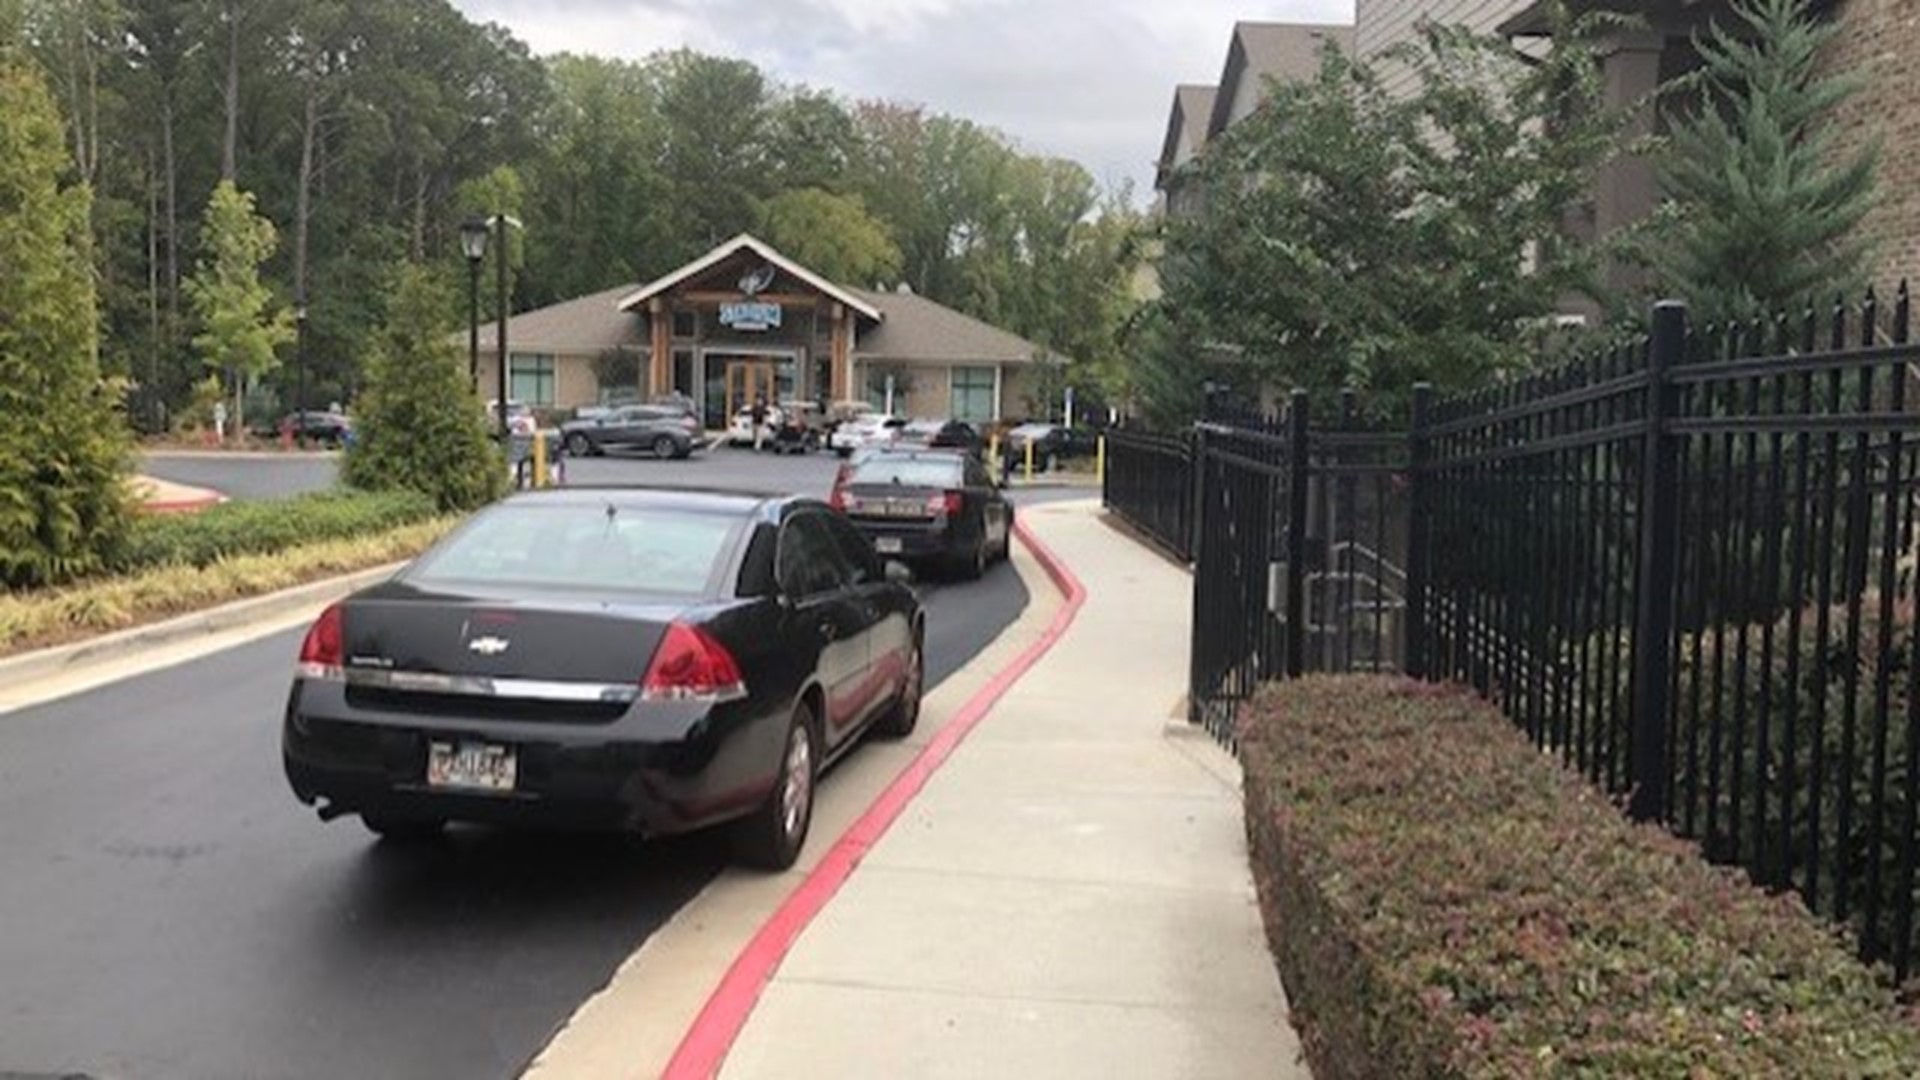 Kennesaw State University officials confirmed Monday morning that the person killed in a shooting at an apartment complex near the university campus was a student.